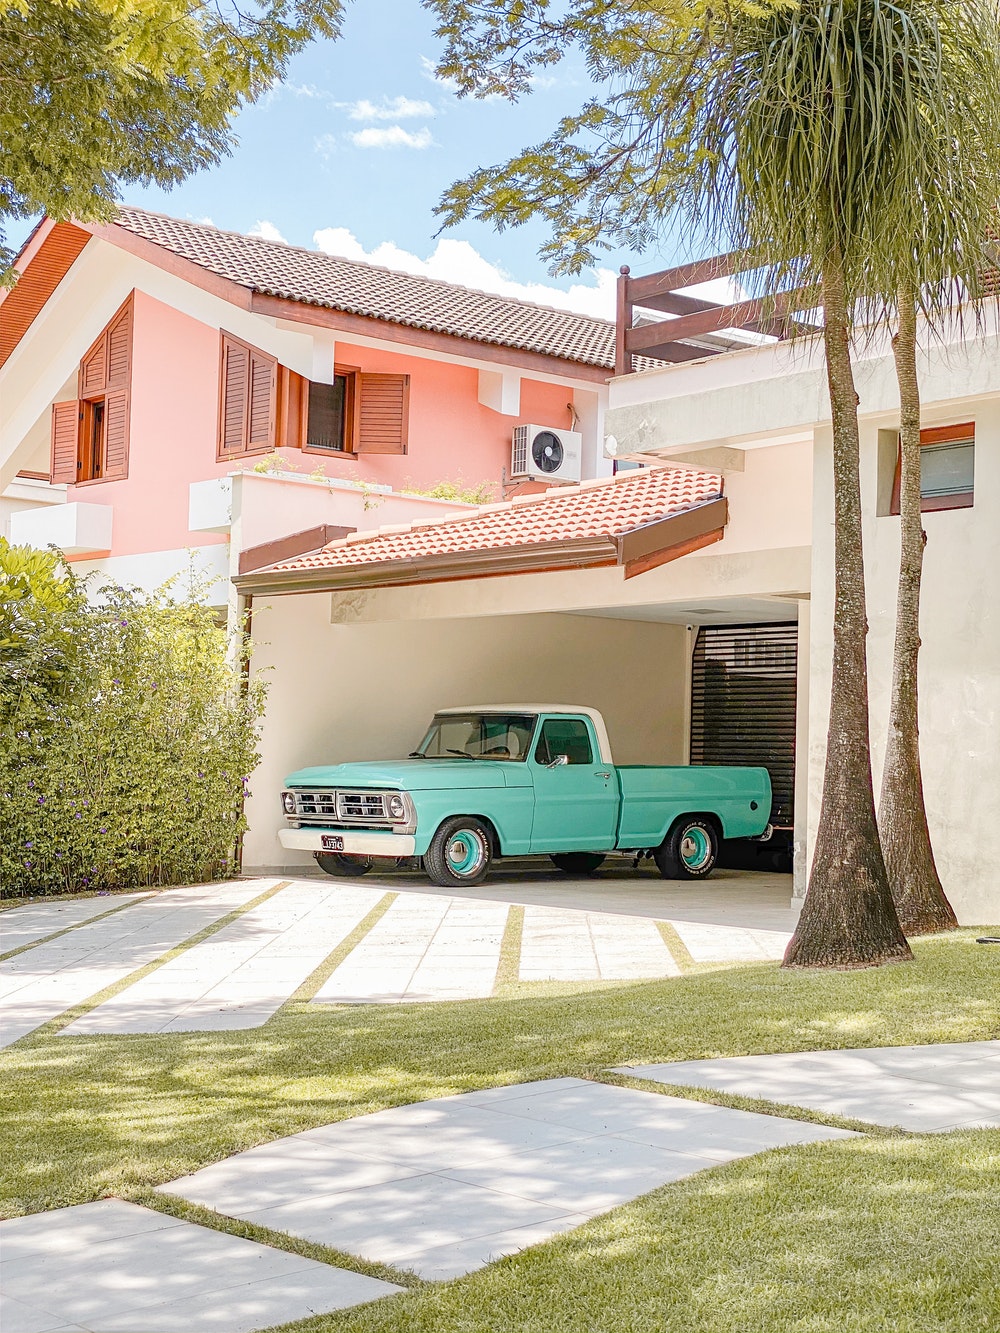 How to Select the Right Colour for a Garage Door